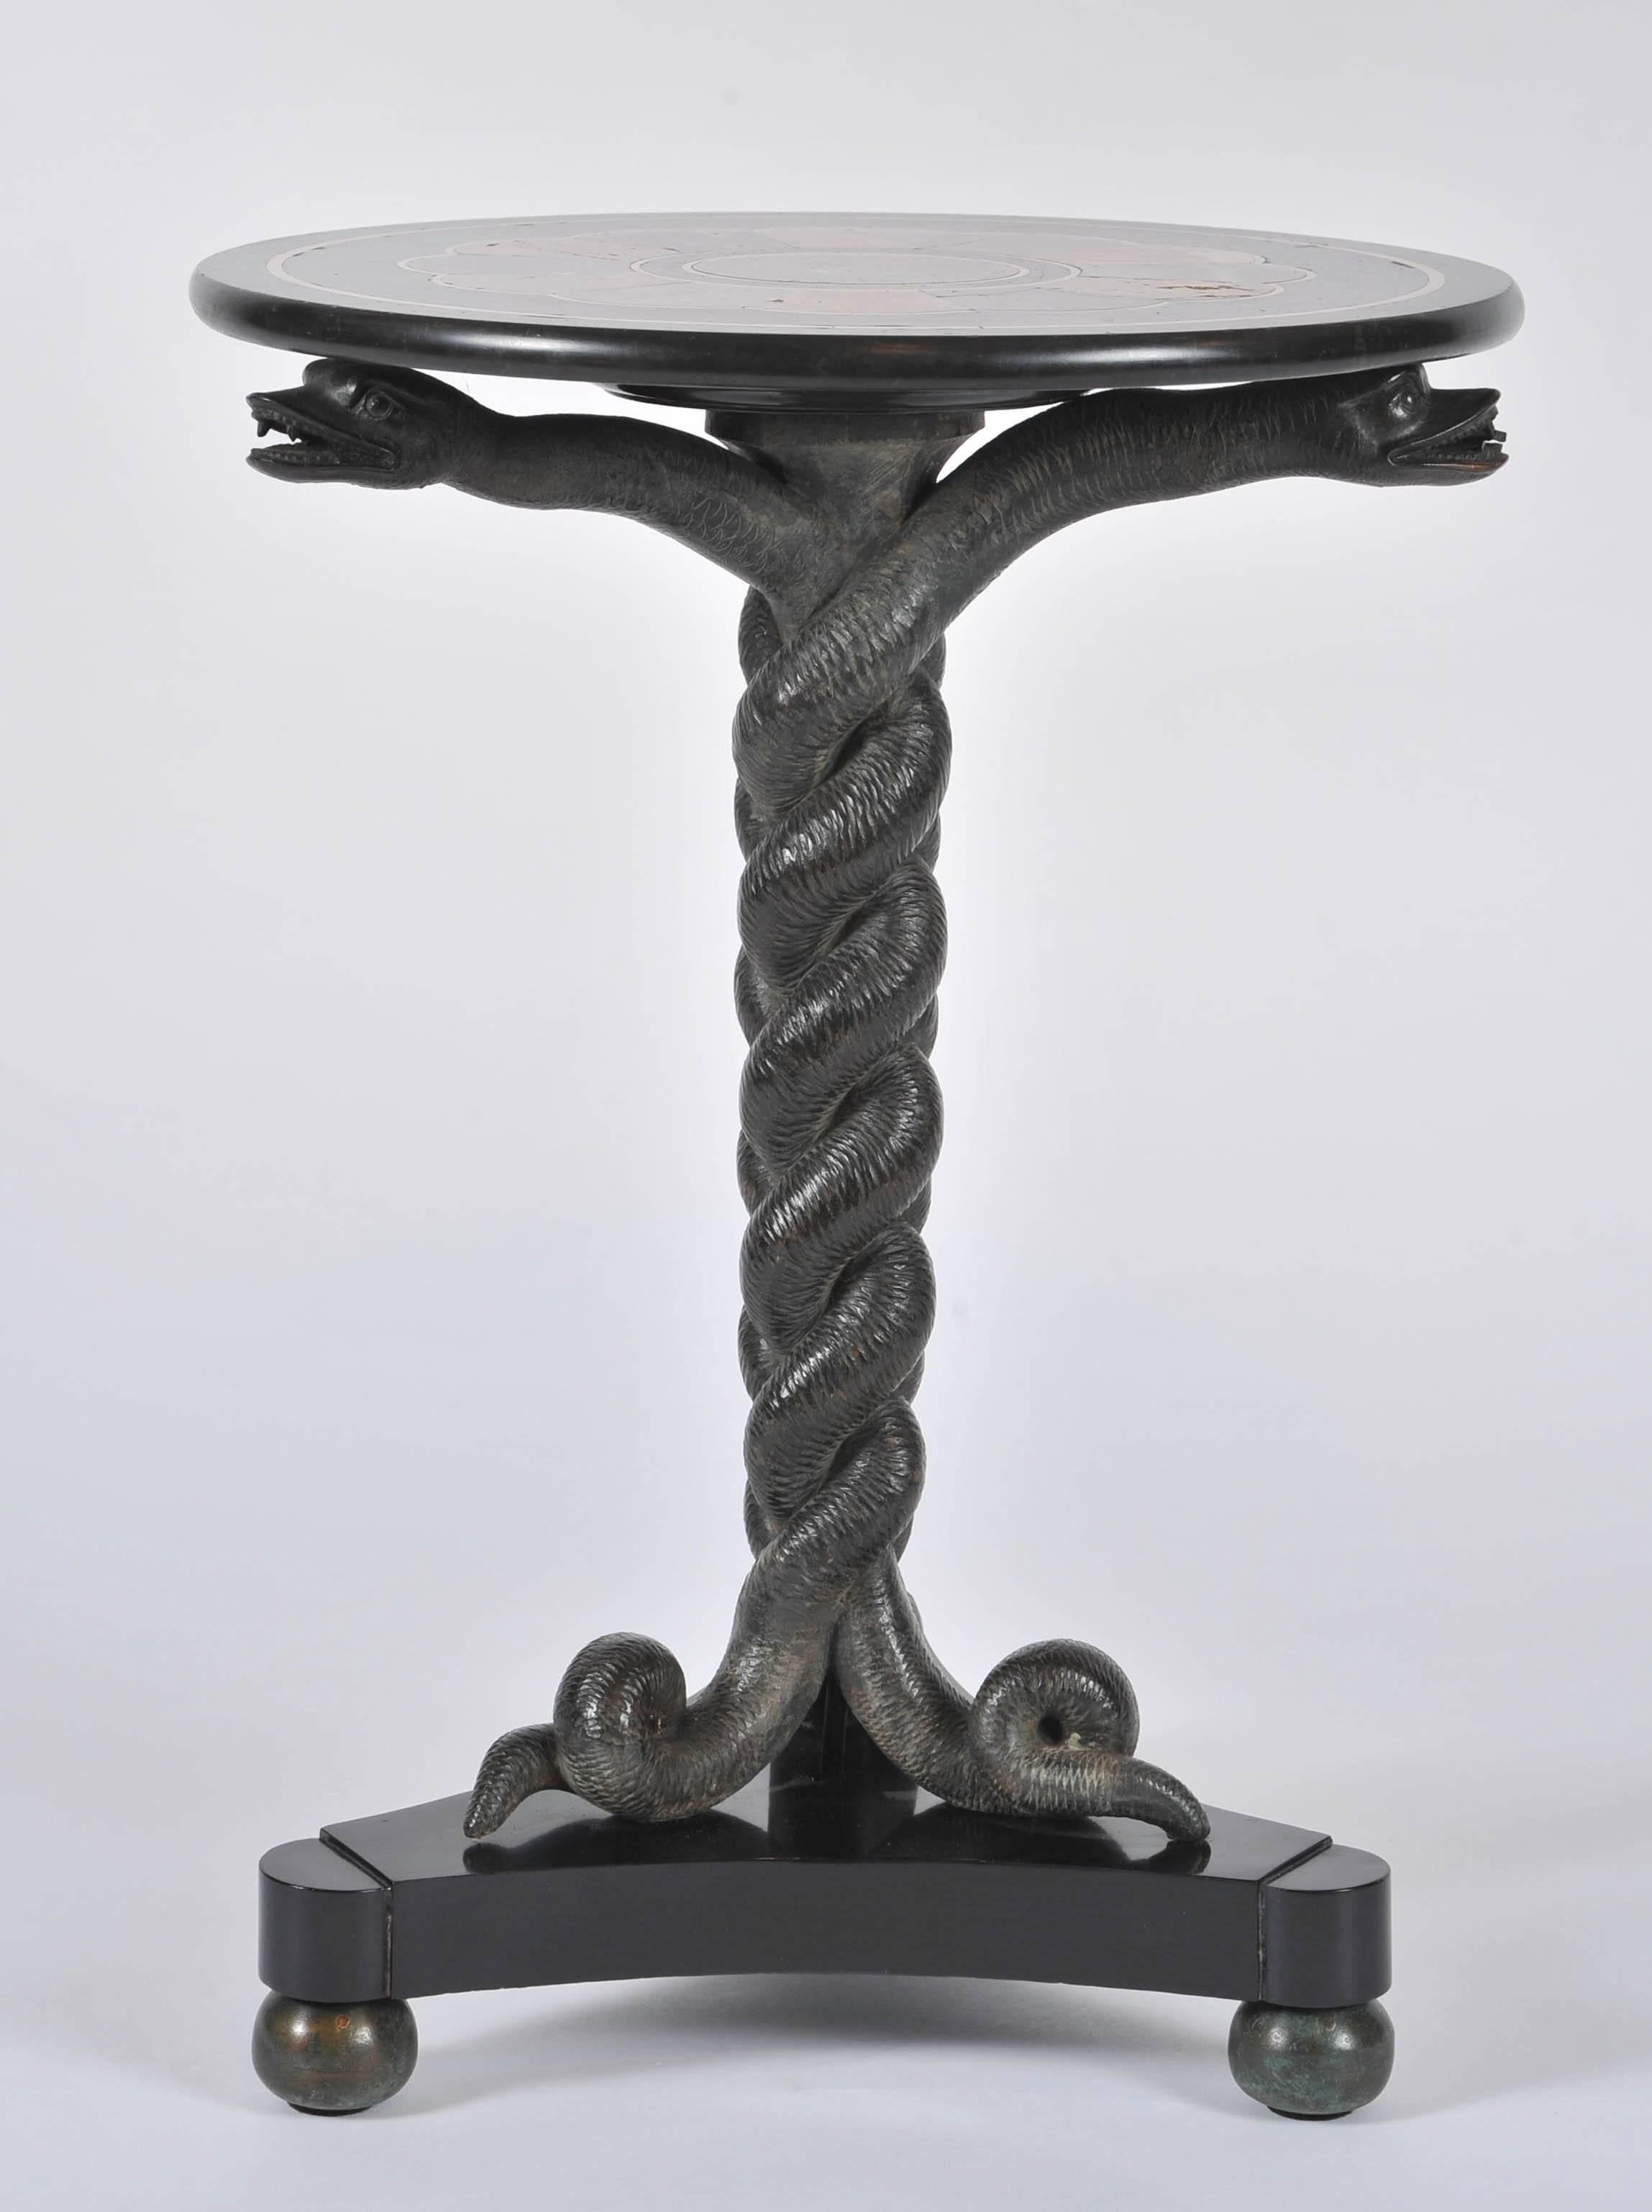 An exceptional Regency period table with specimen marble top supported by three intertwined serpents, on a triform base. The serpents carved wood simulating bronze, the base ebonized to simulate bronze and the feet patinated brass in the typical